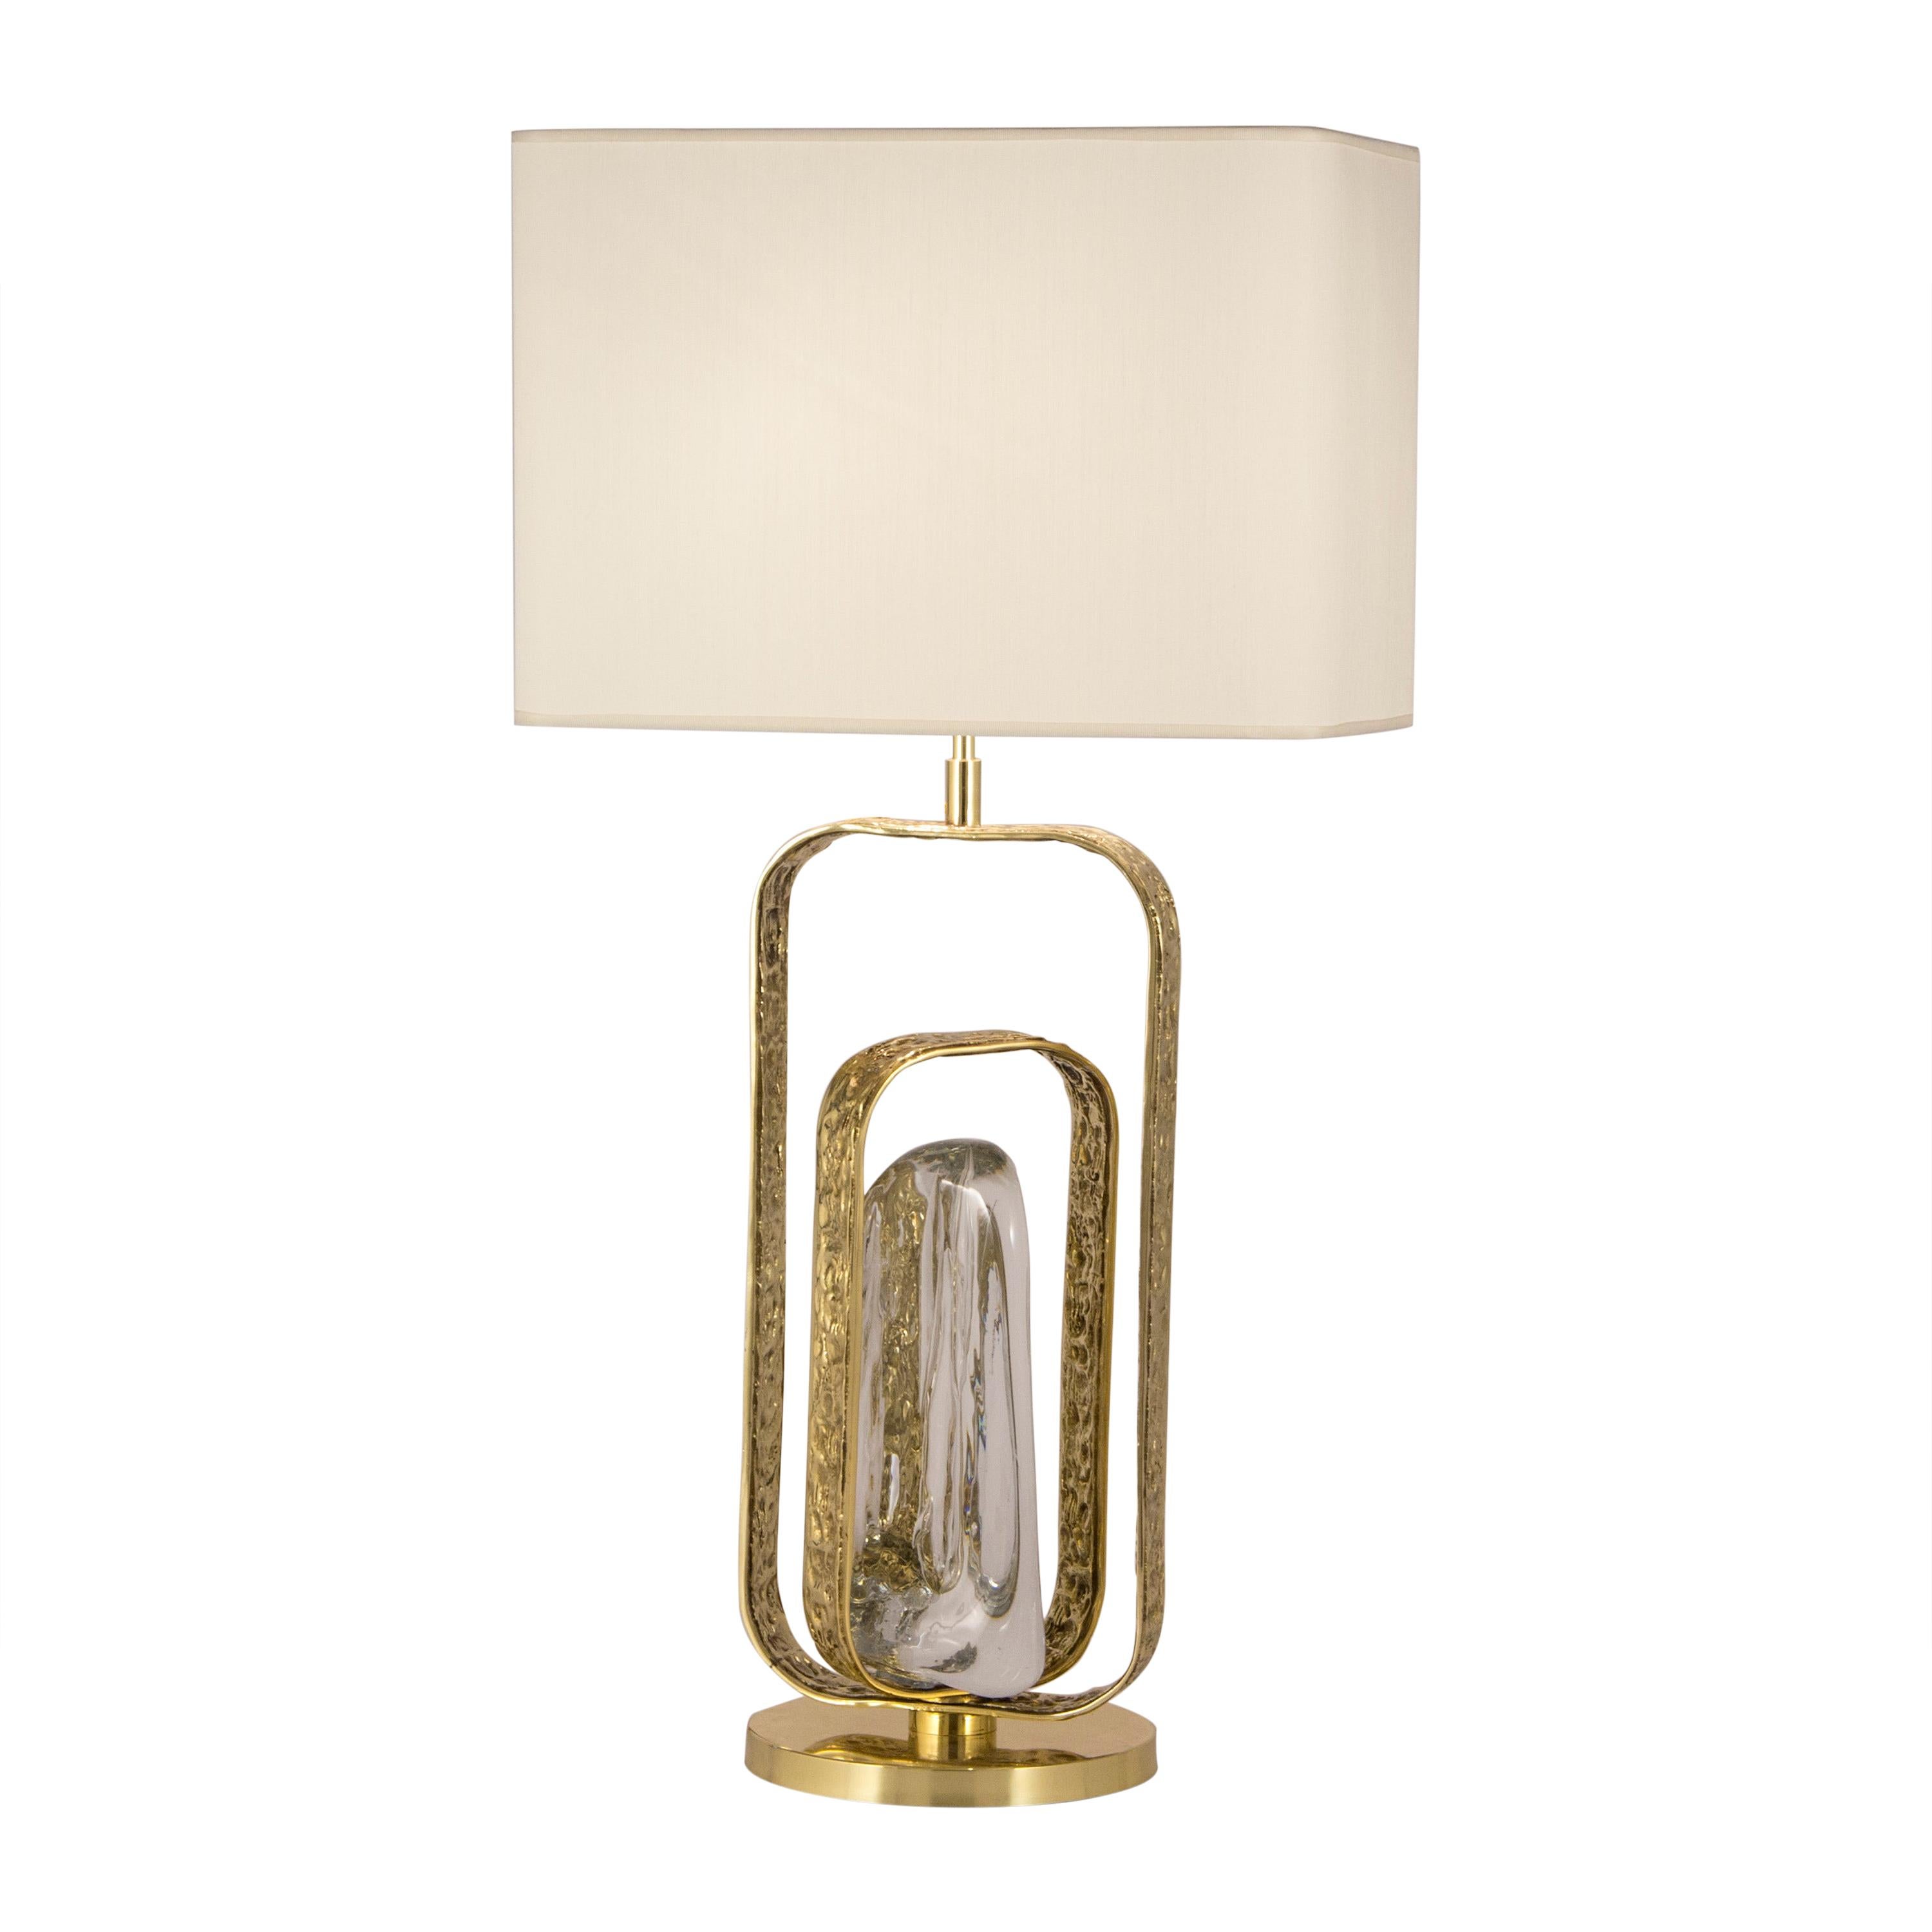 Brass and Crystal "Potter" Table Lamp